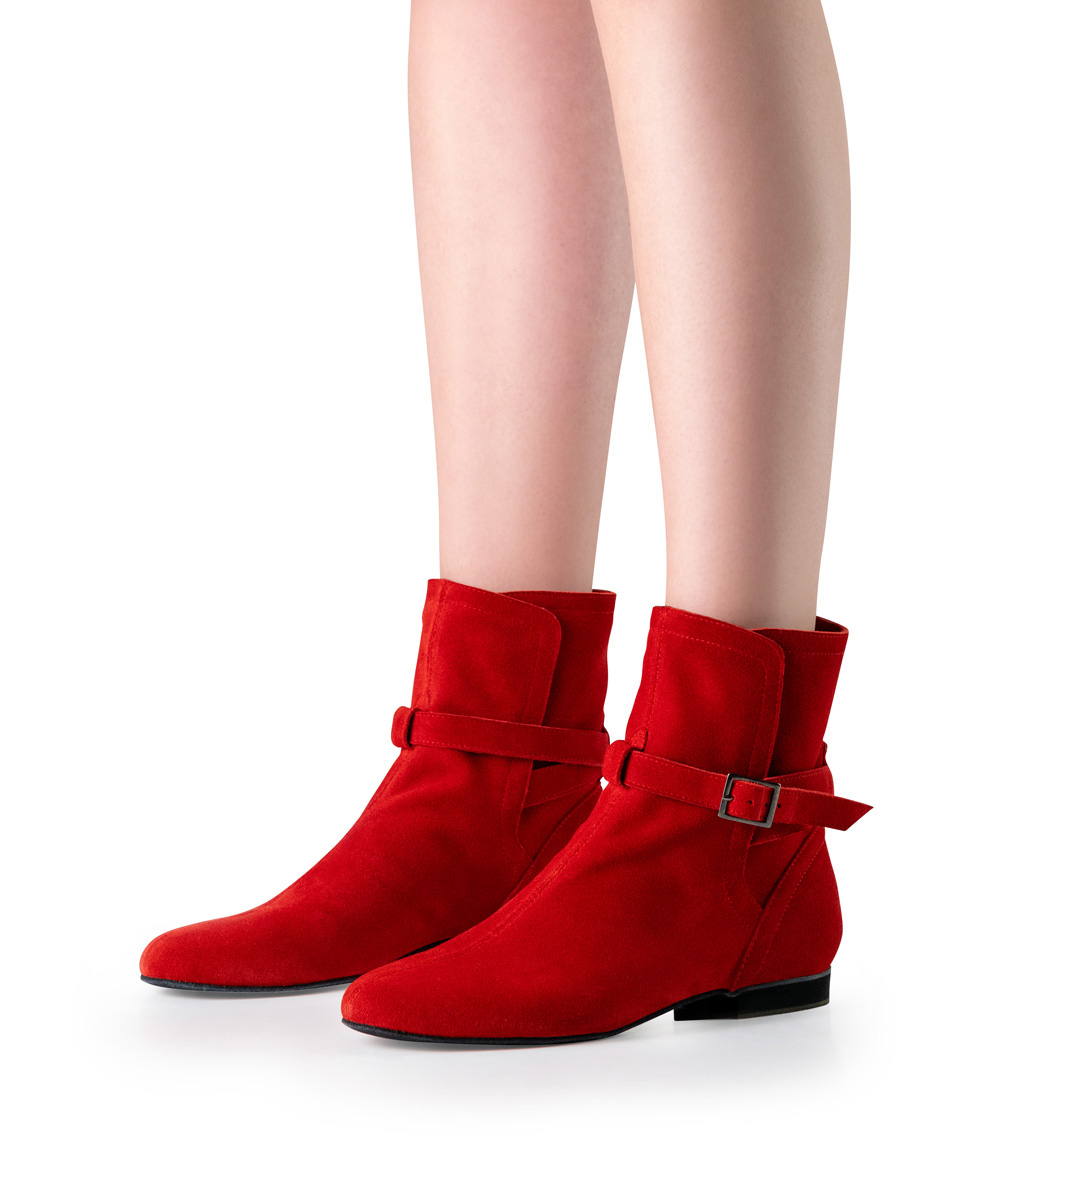 Werner Kern Linedance Dance Boots with 1.5 cm Heel in Red Velour